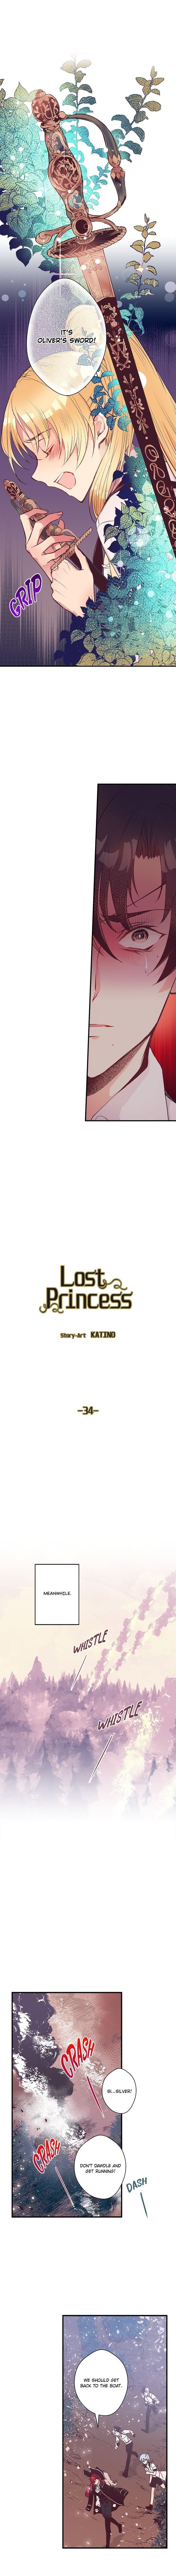 Lost Princess Chapter 34